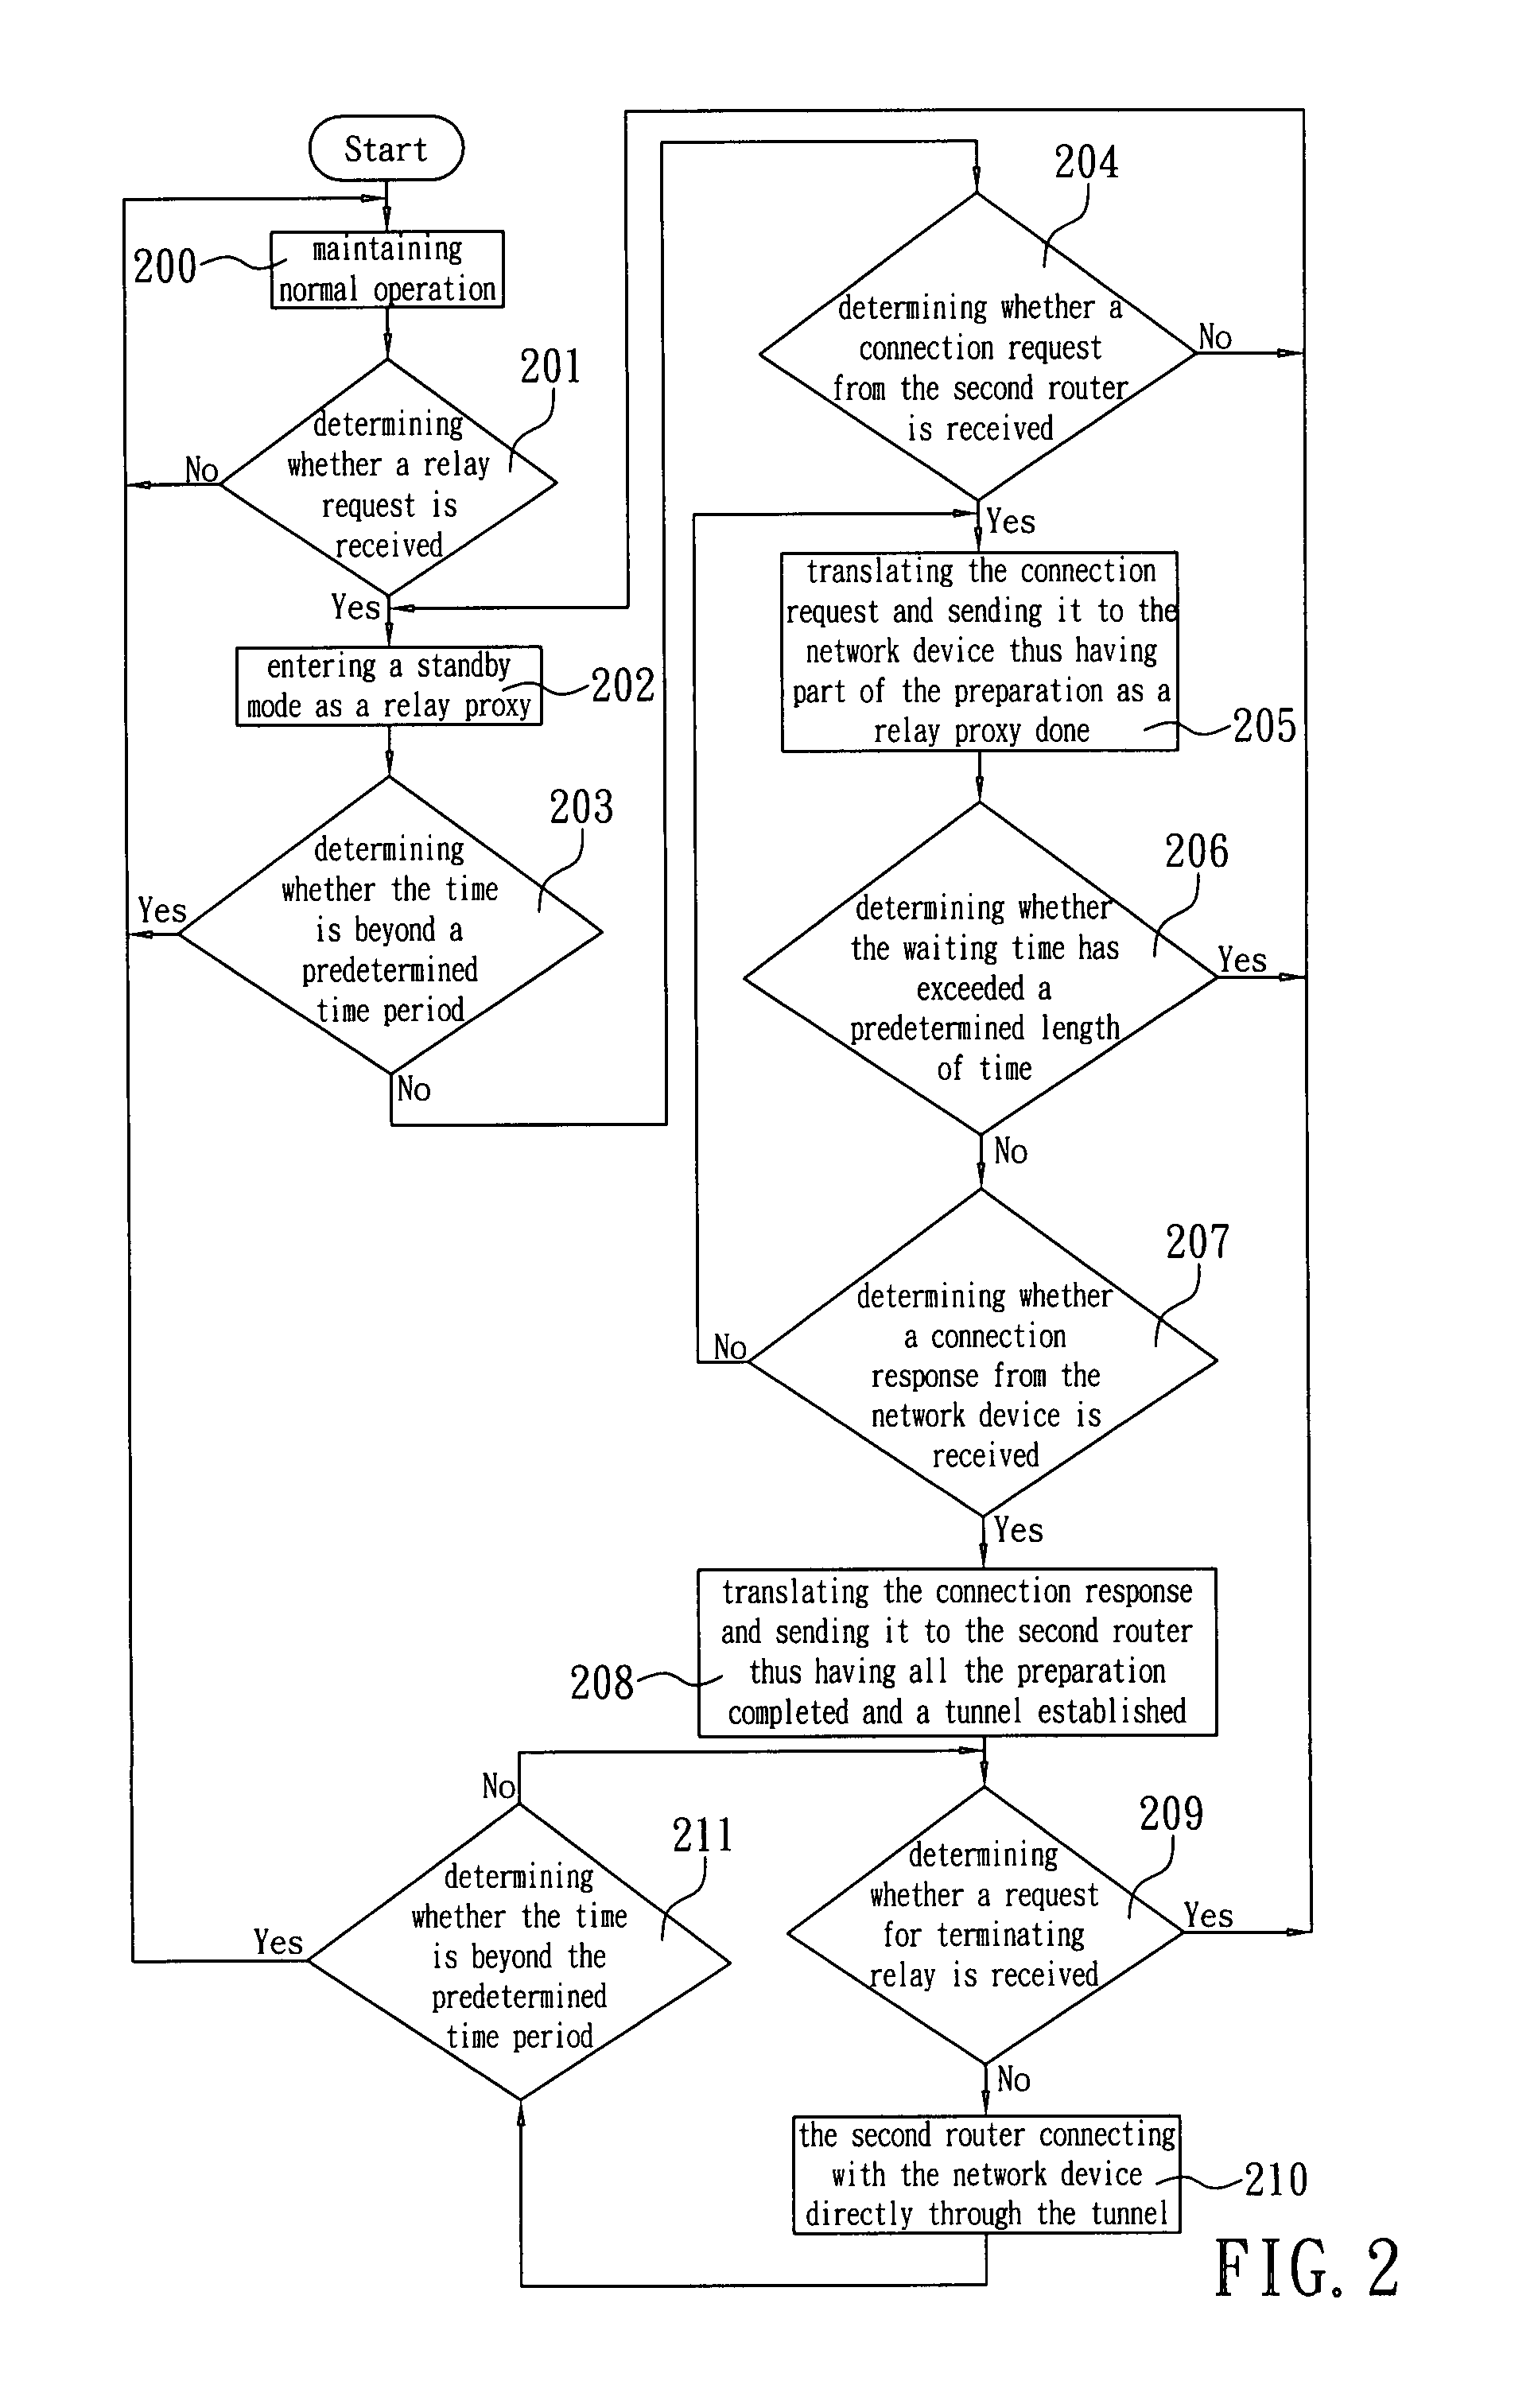 Method of making a router act as a relay proxy